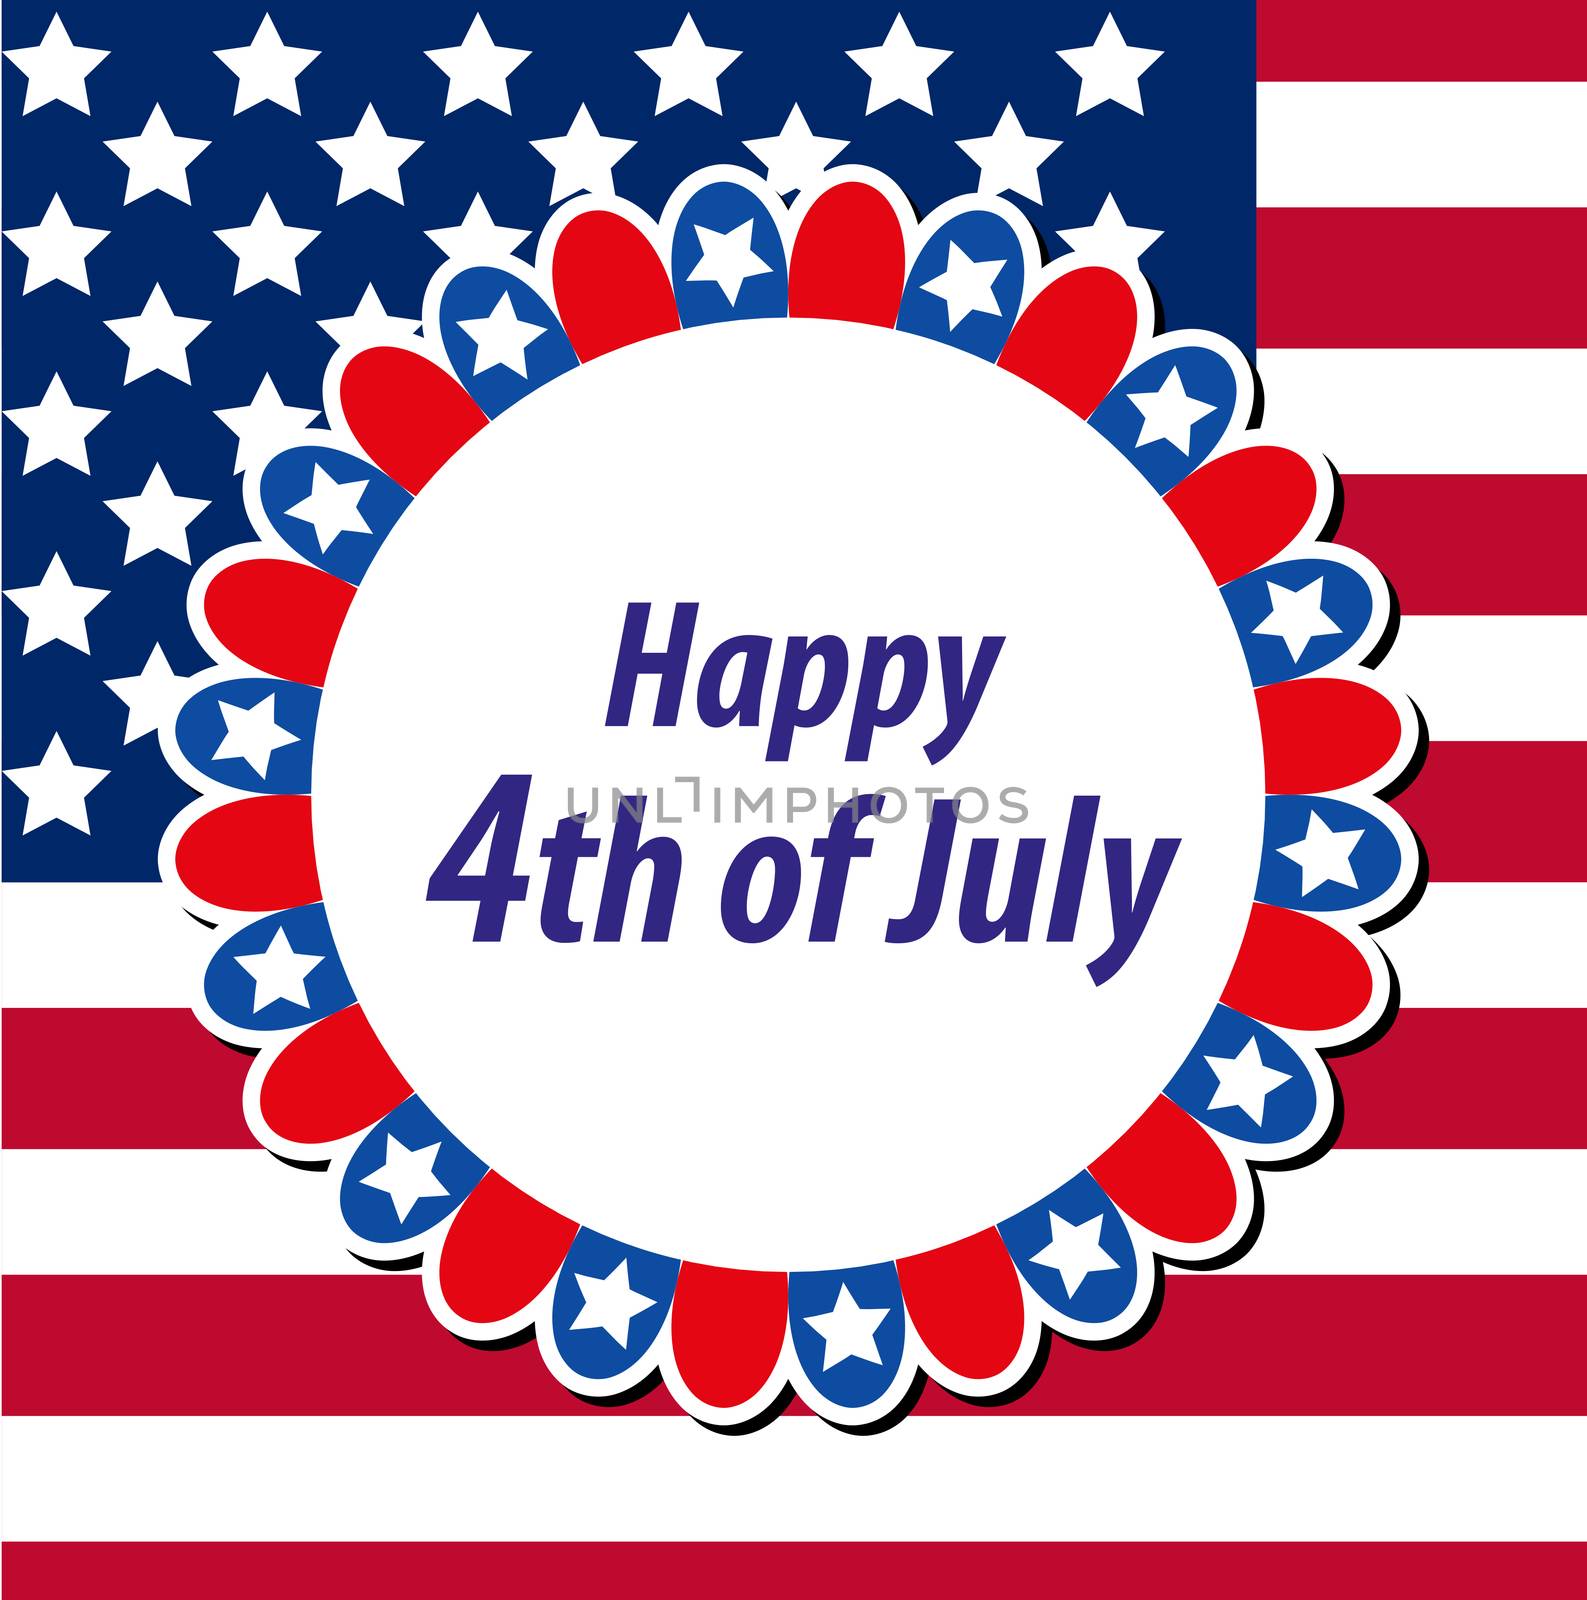 Happy 4th july greeting card, poster. American Independence Day template for your design. illustration. by lucia_fox